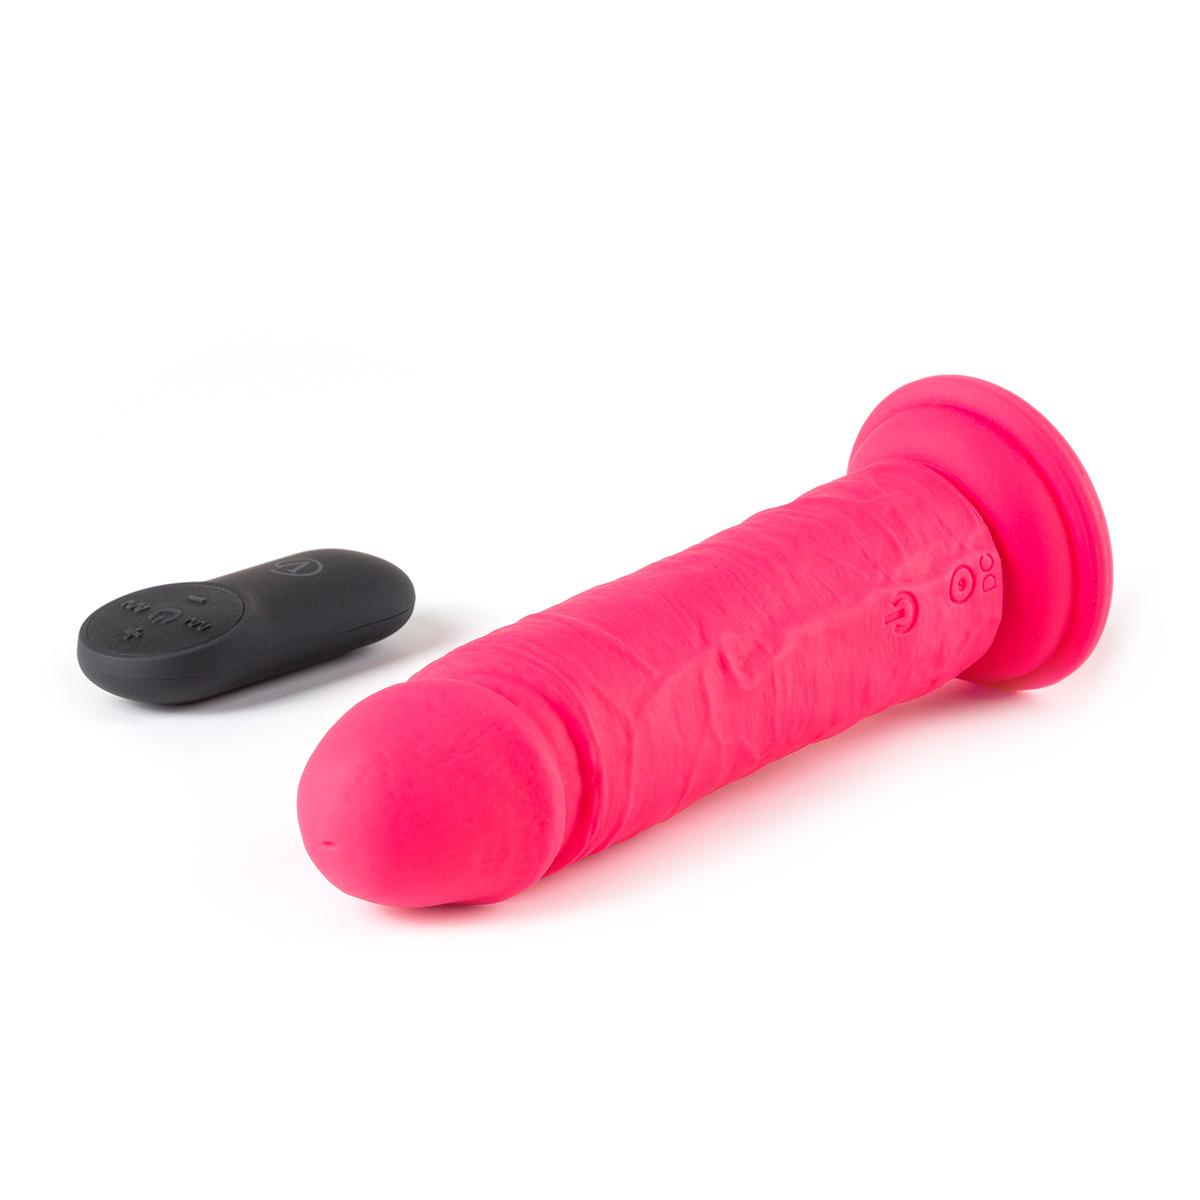 Vibrating-Realistic-with-Remote-R11-Pink-OPR-3090093-1